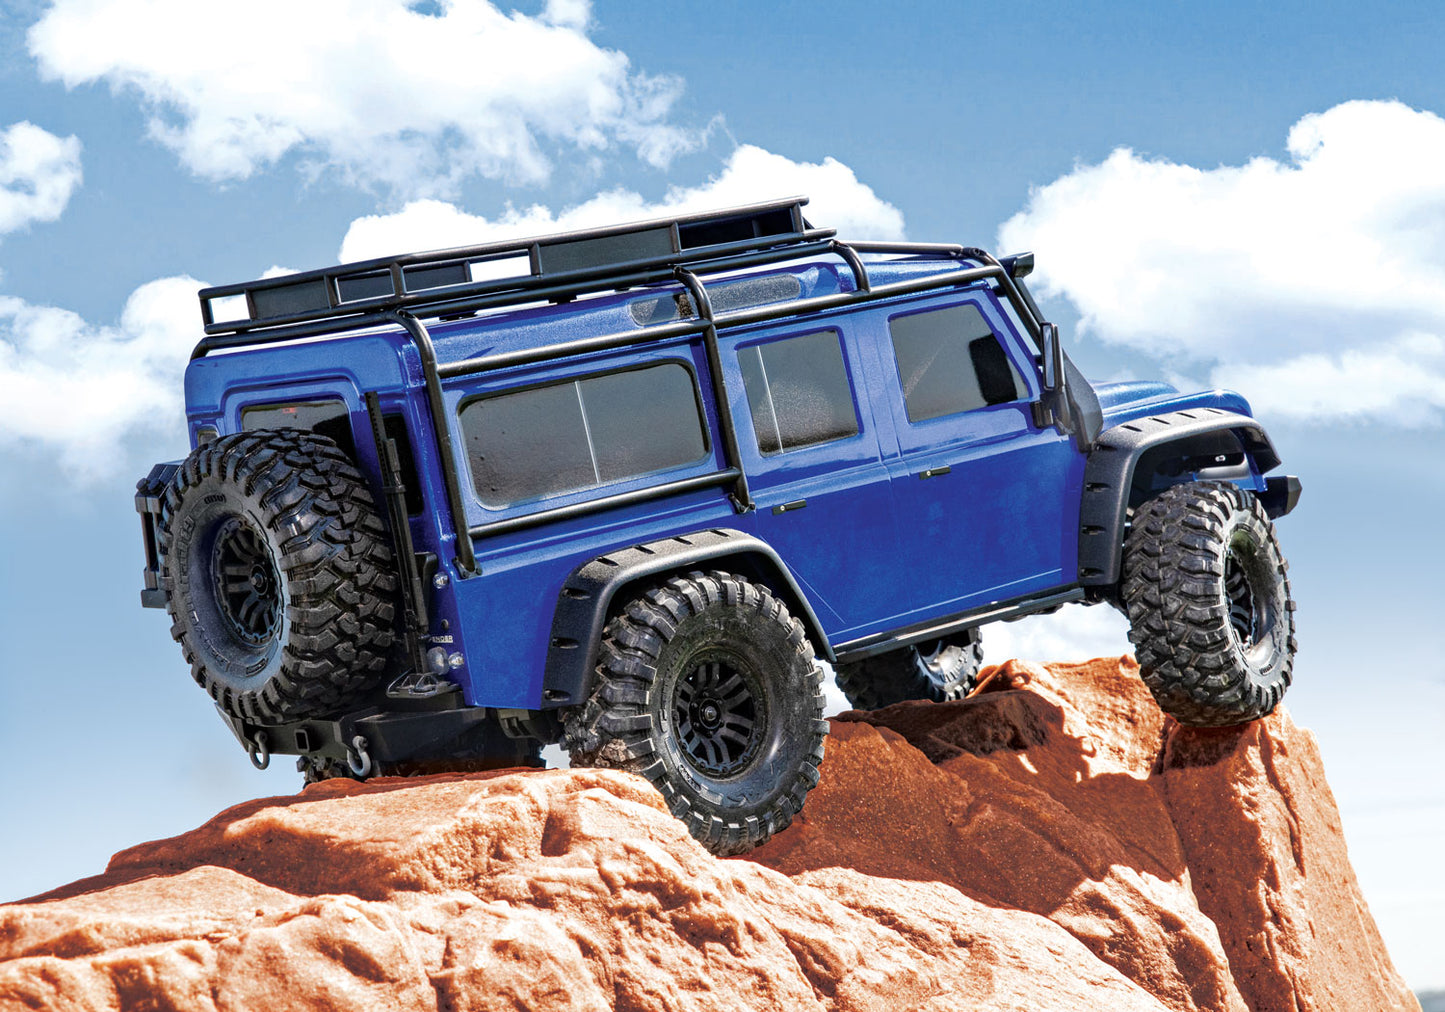 82056-4-BLUE TRX-4 Scale and Trail Defender  Blue